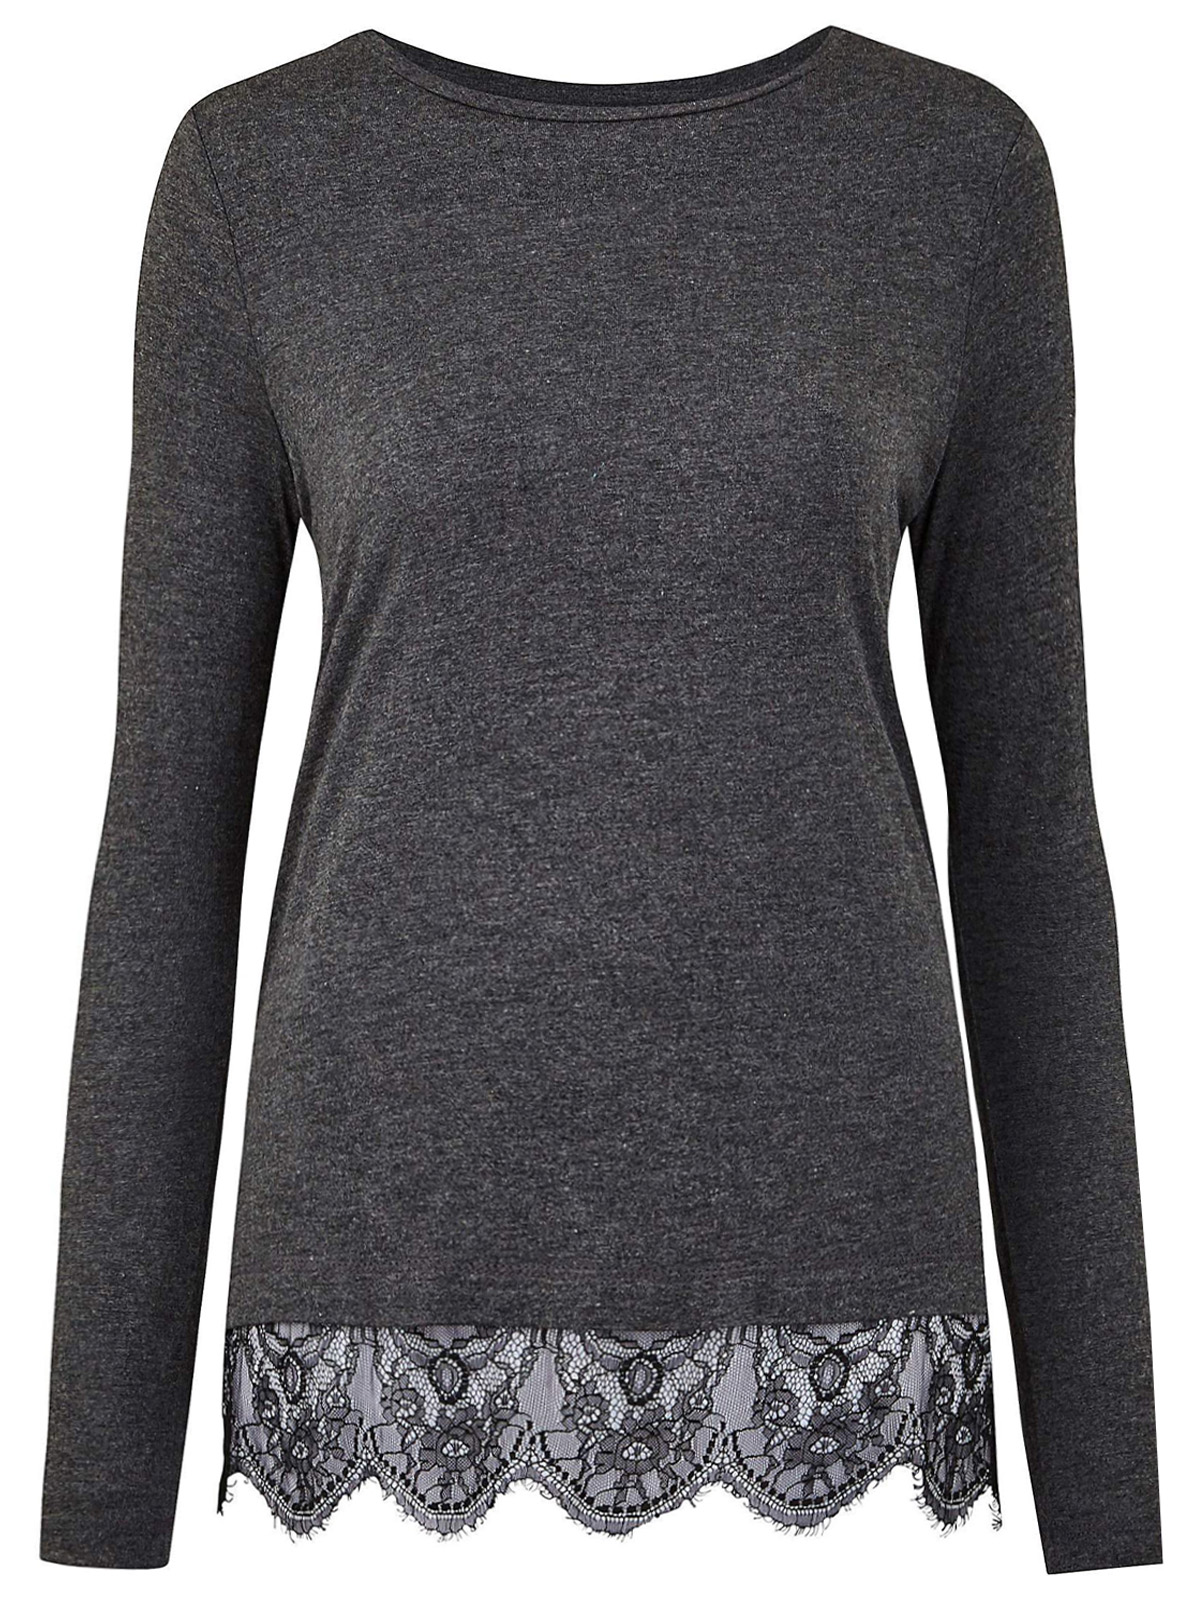 Capsule - - Capsule CHARCOAL Long Sleeve Lace Hem Top - Size 10 to 32